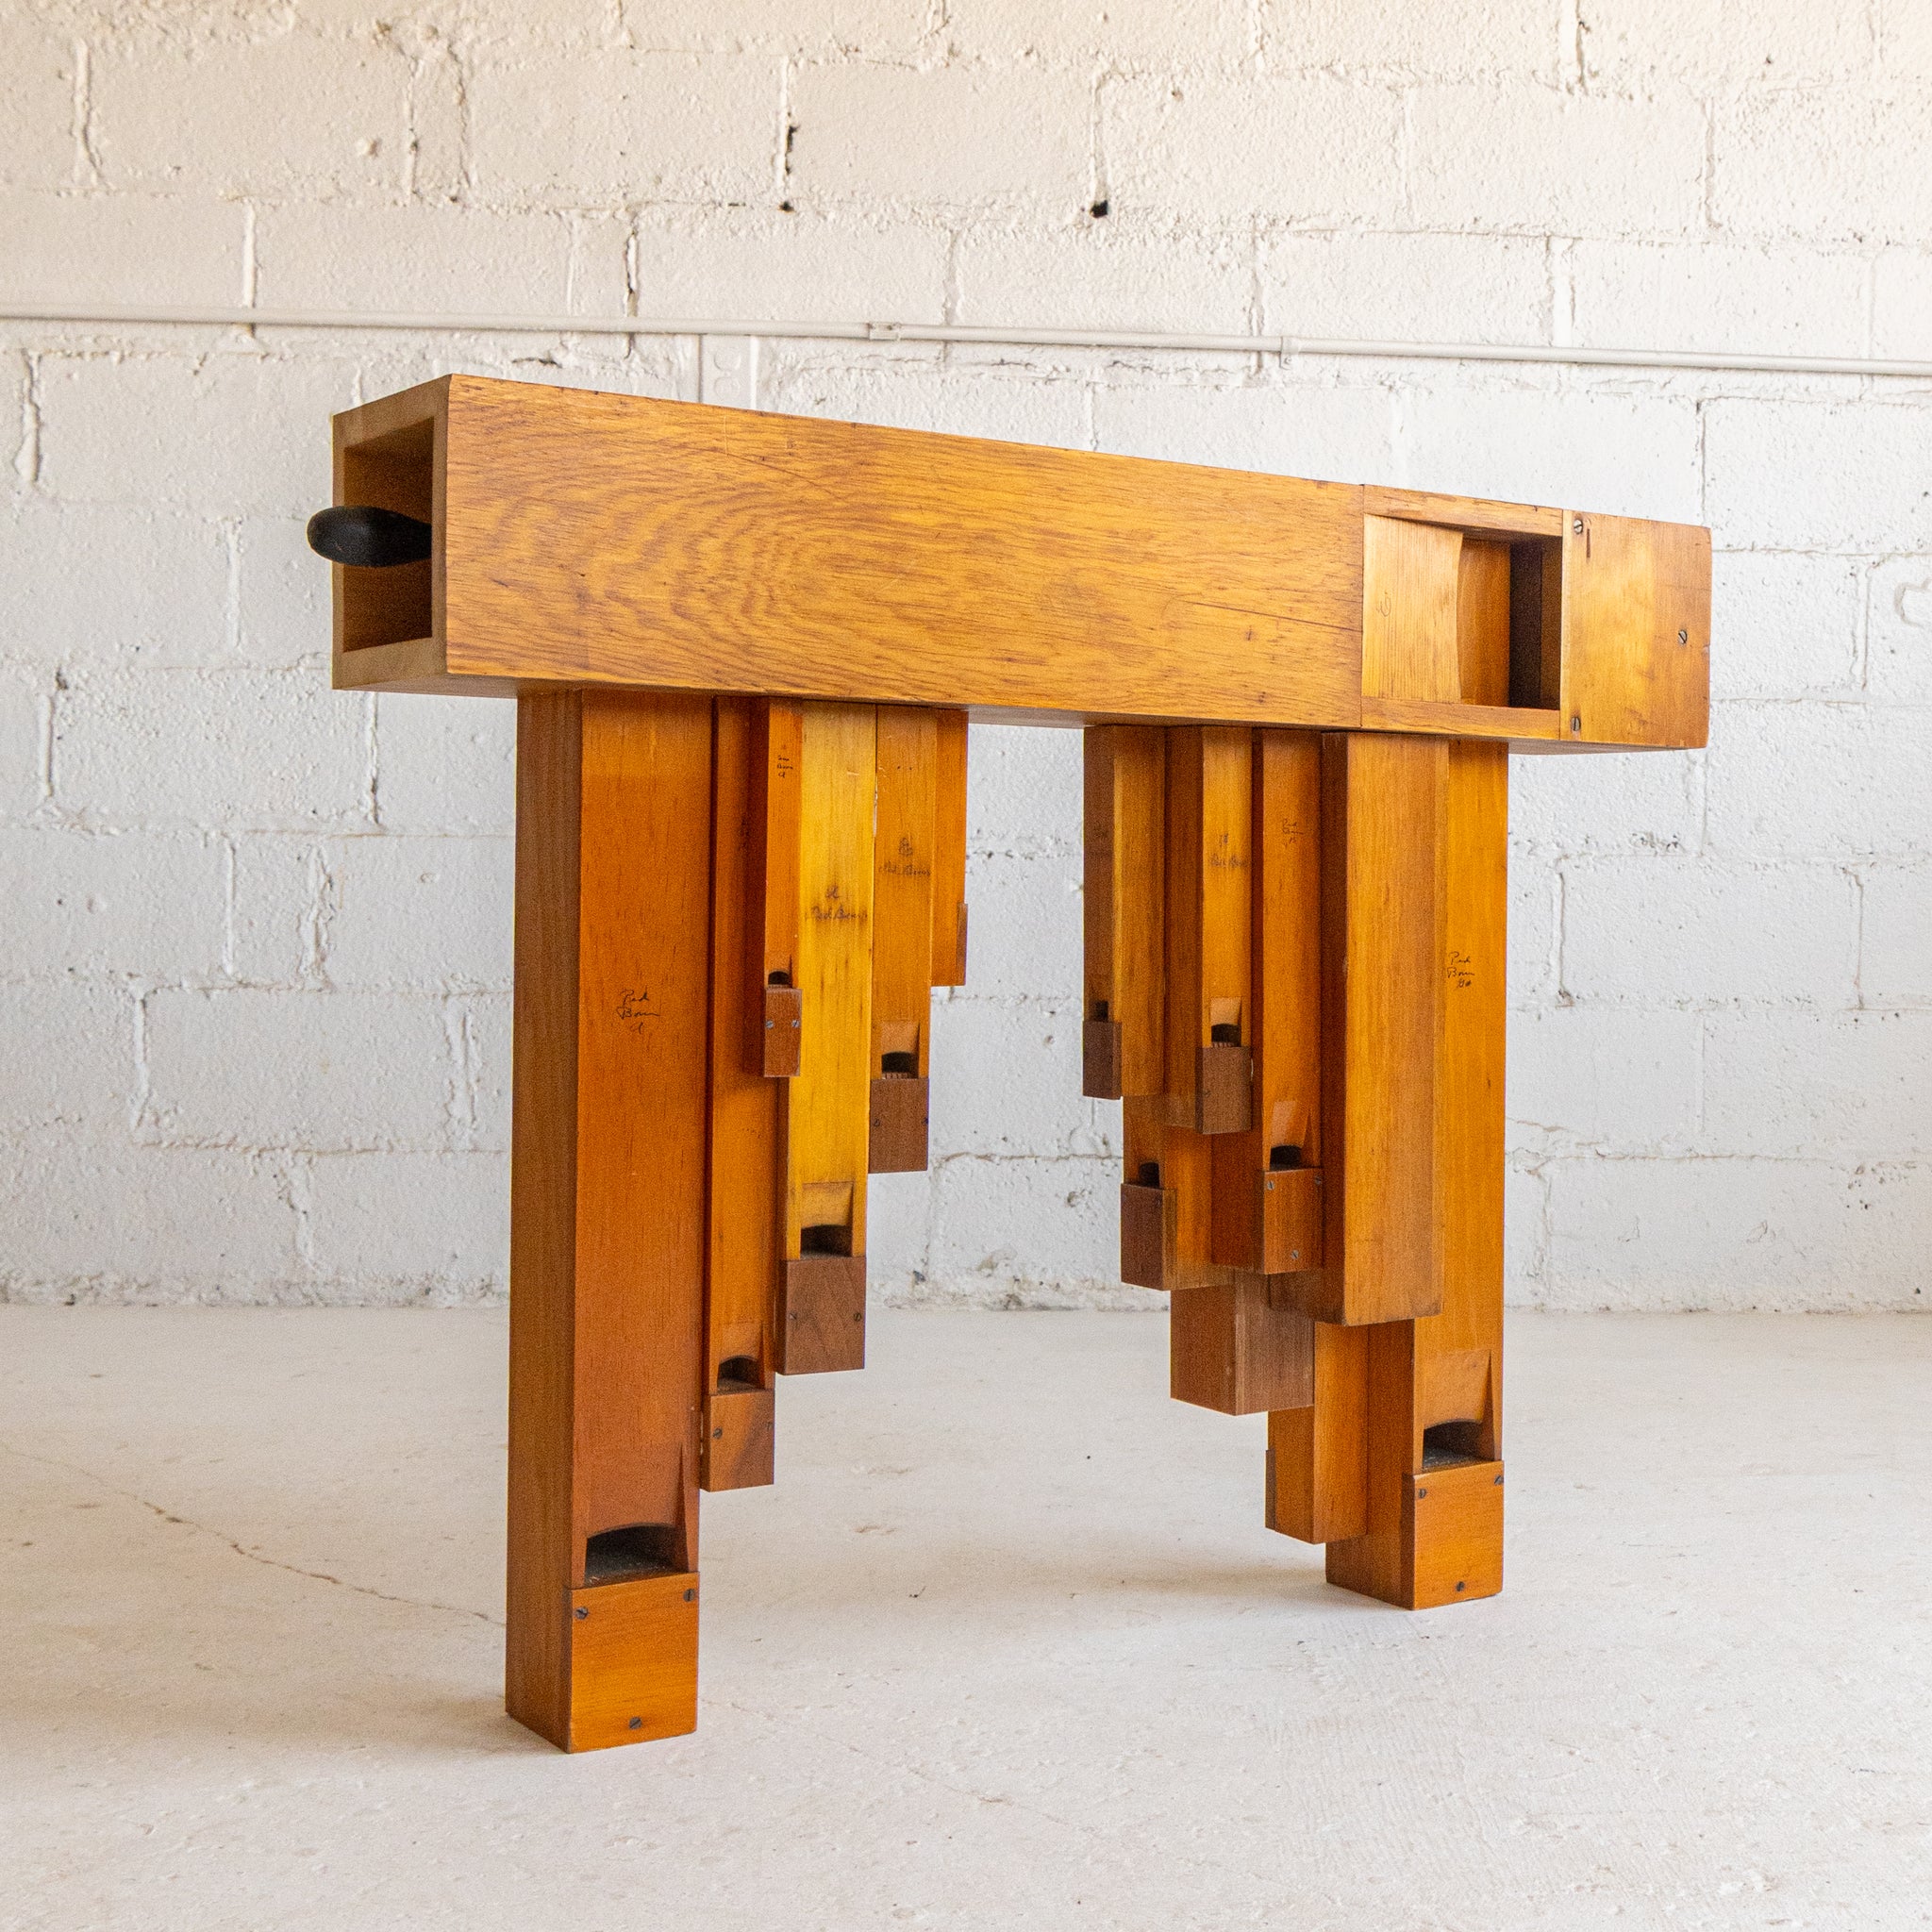 pipe organ entry table 8 full view reclaimed wood